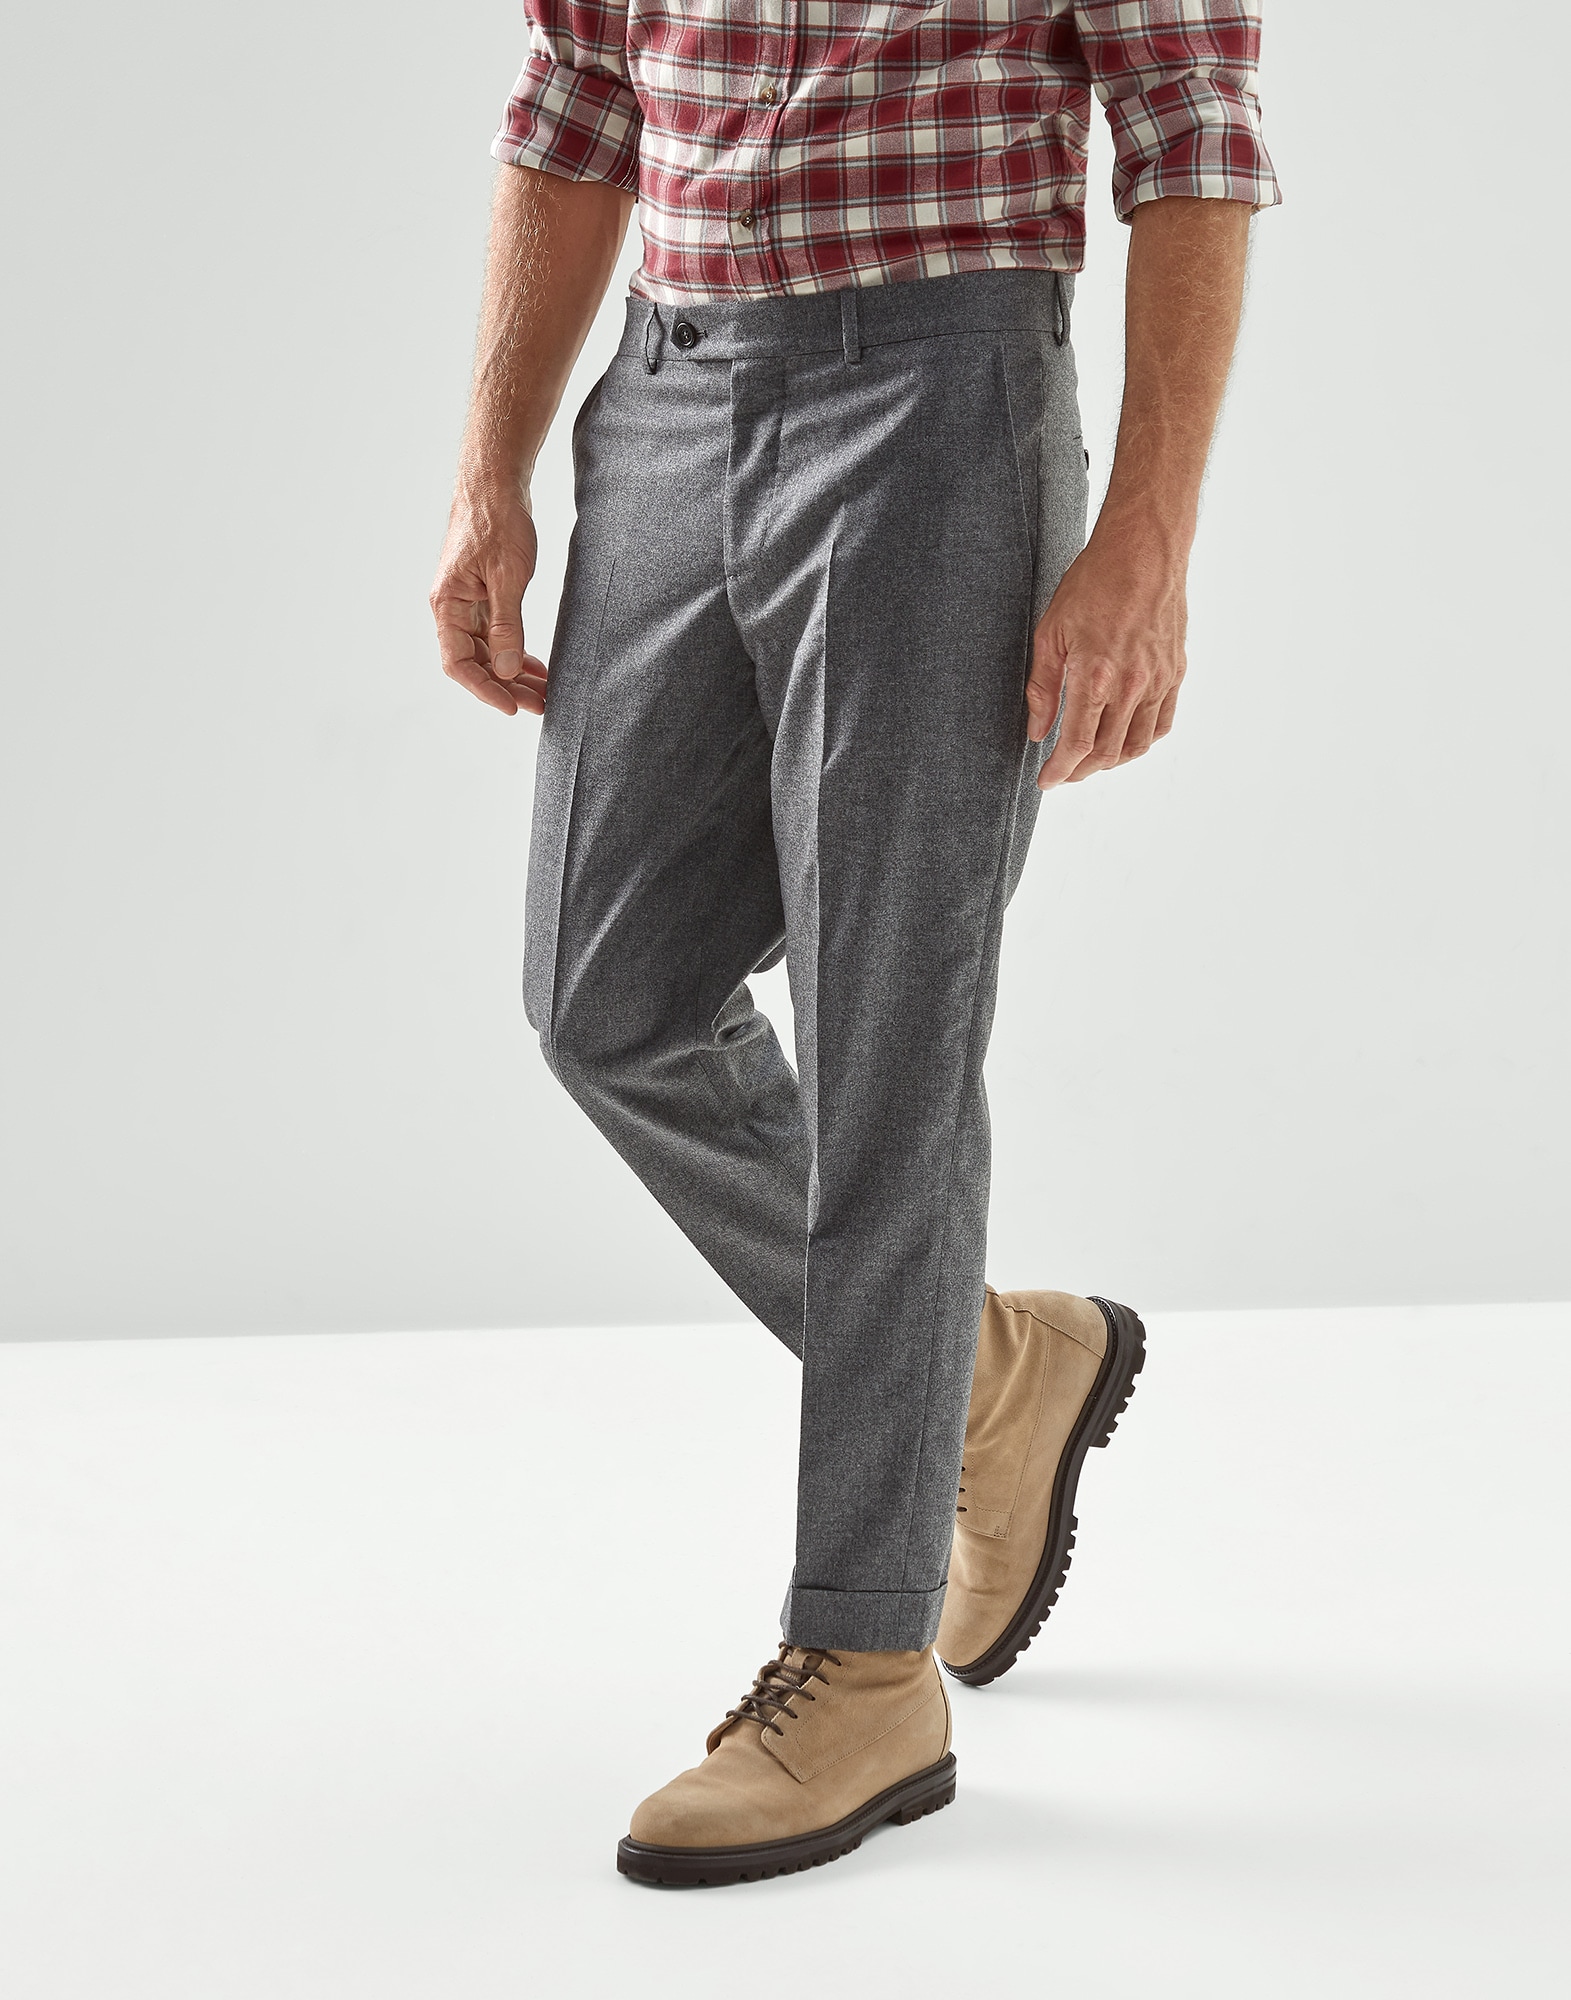 Flannel trousers